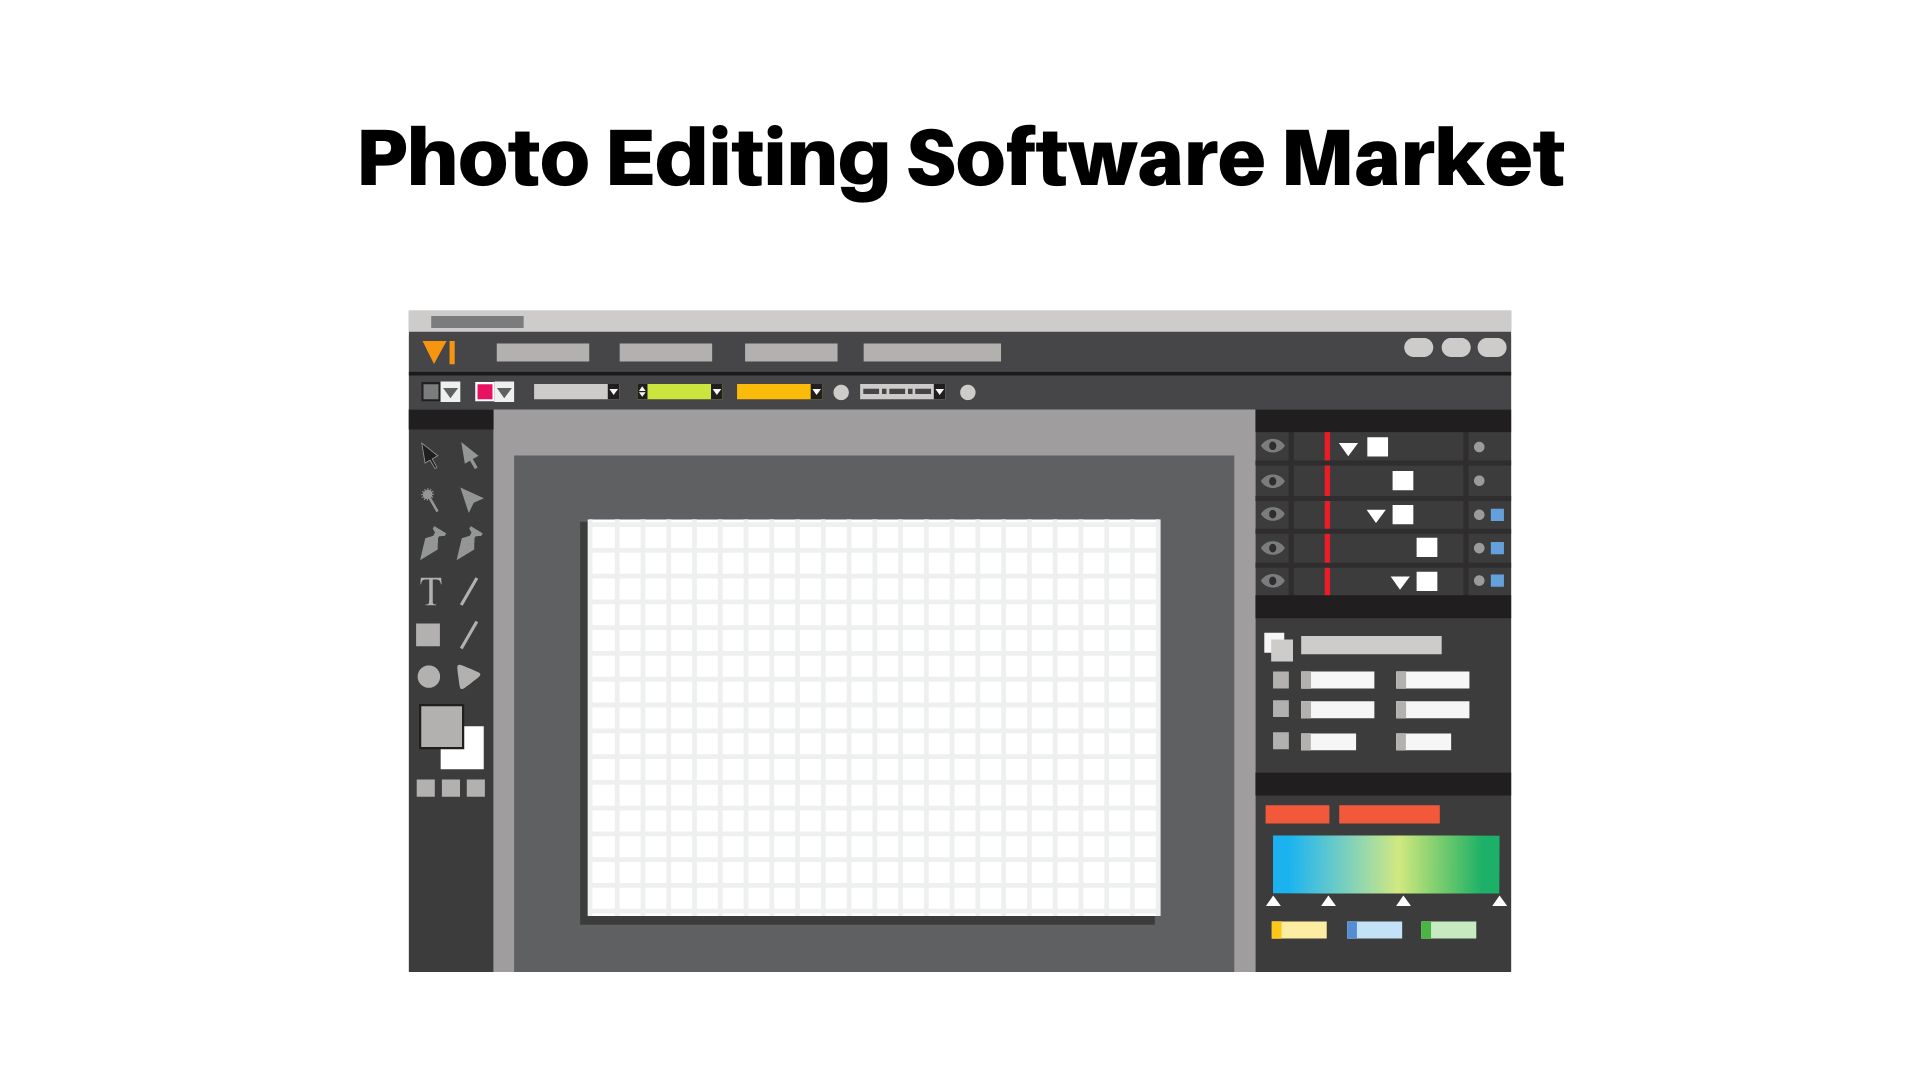 Photo Editing Software Market Economic Growth CAGR of 6.4%, 2022-2032